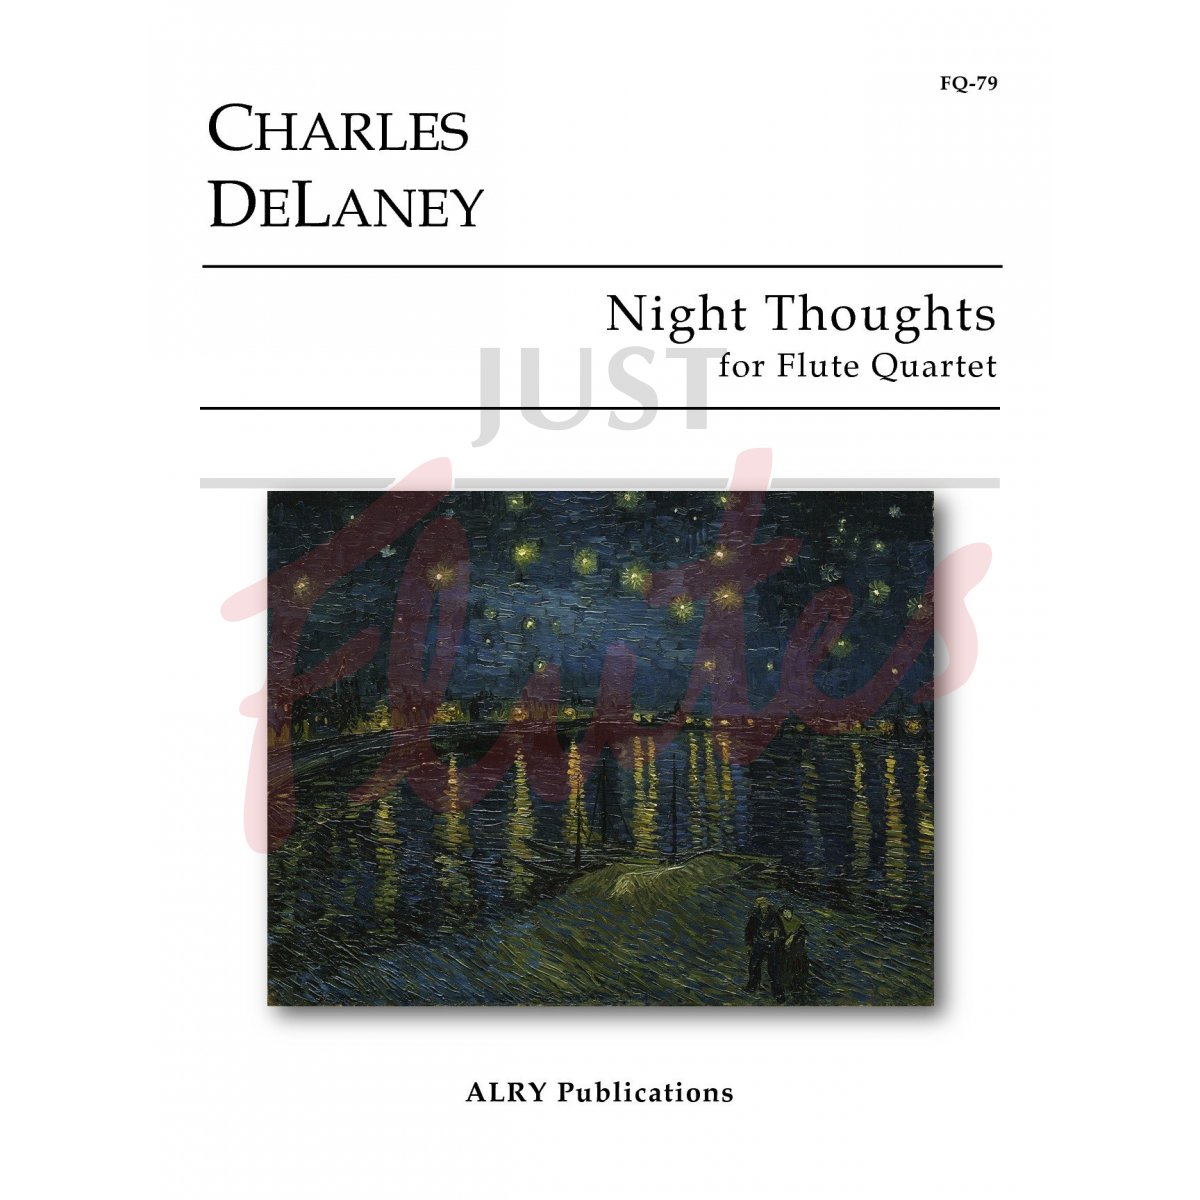 Night Thoughts for Flute Quartet